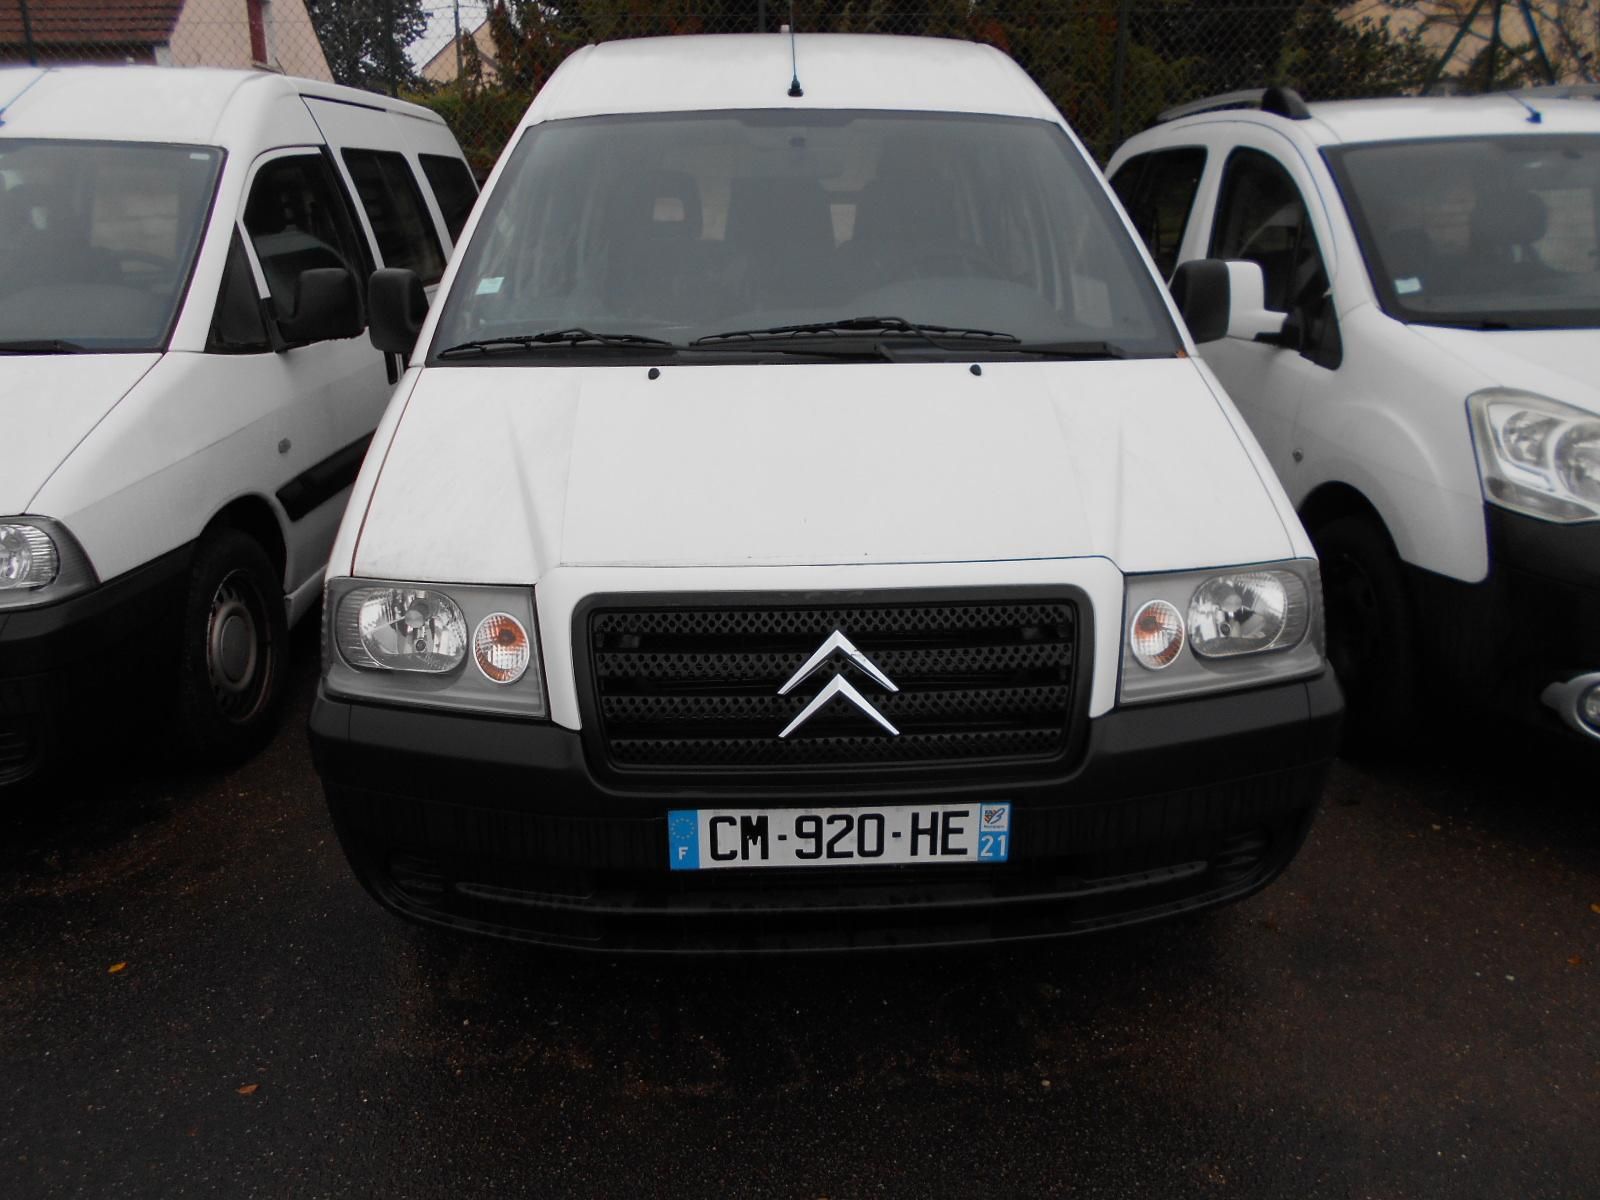 Null [RP] Reserved for Professionals.

CITROEN JUMPY Diesel, imm. CM-920-HE, typ&hellip;